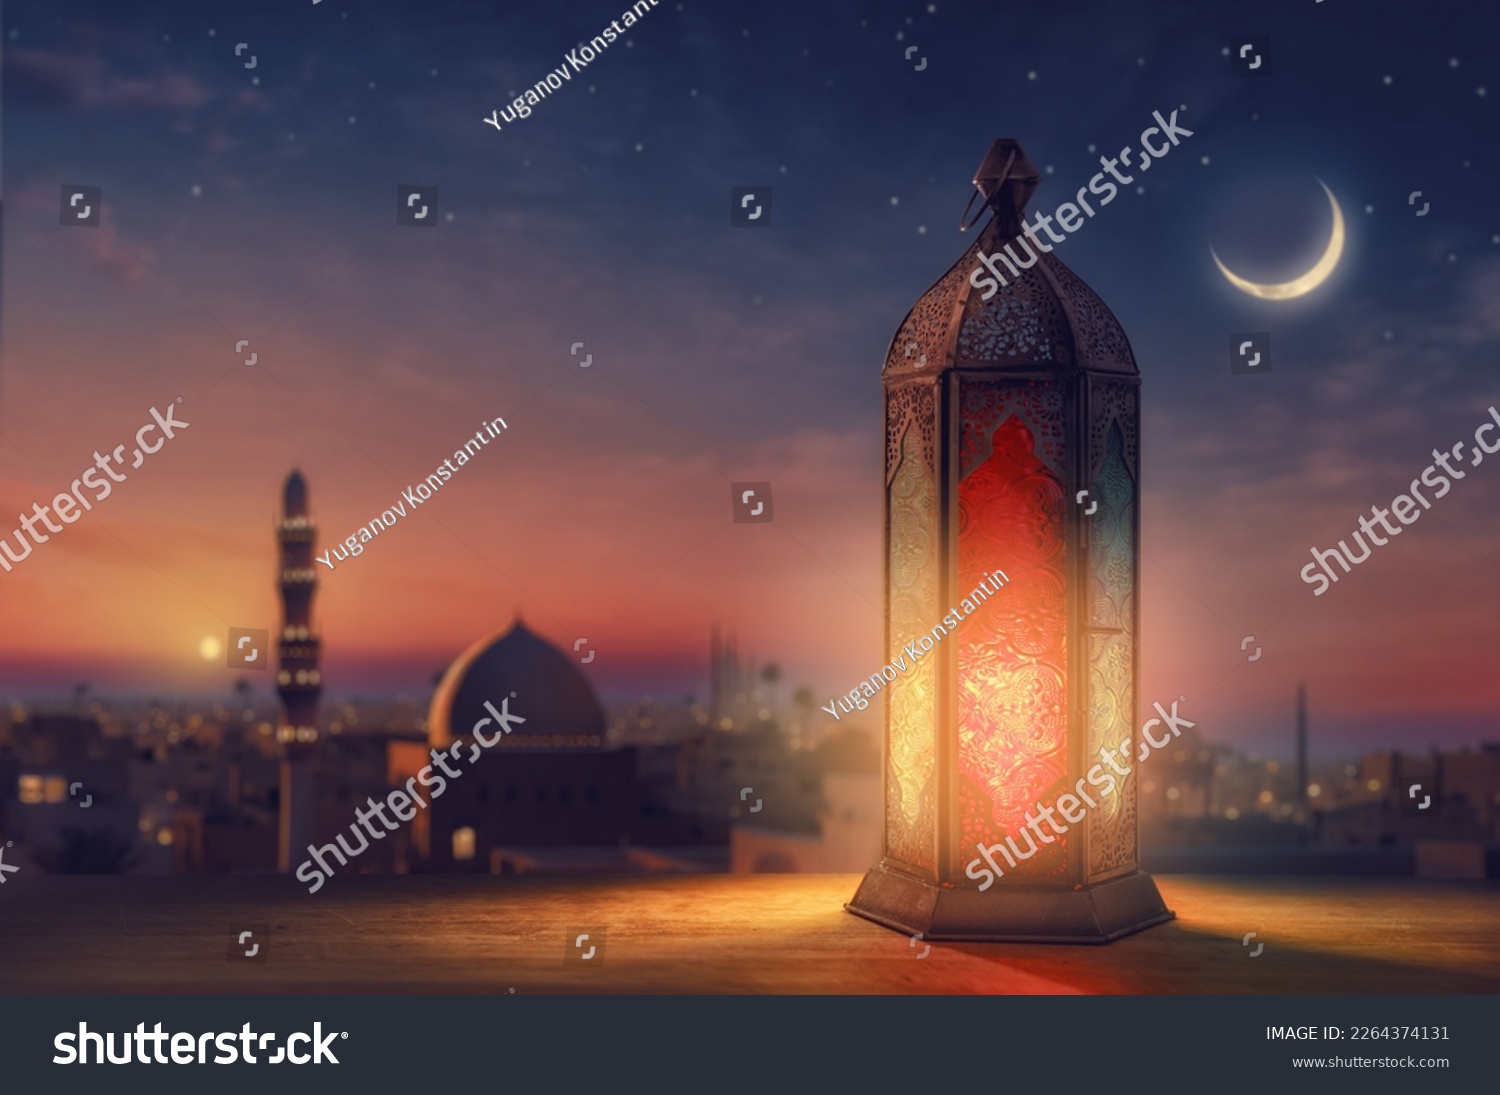 Ornamental Arabic lantern with burning candle glowing at night mosque background. Festive greeting card, invitation for Muslim holy month Ramadan Kareem. #2264374131